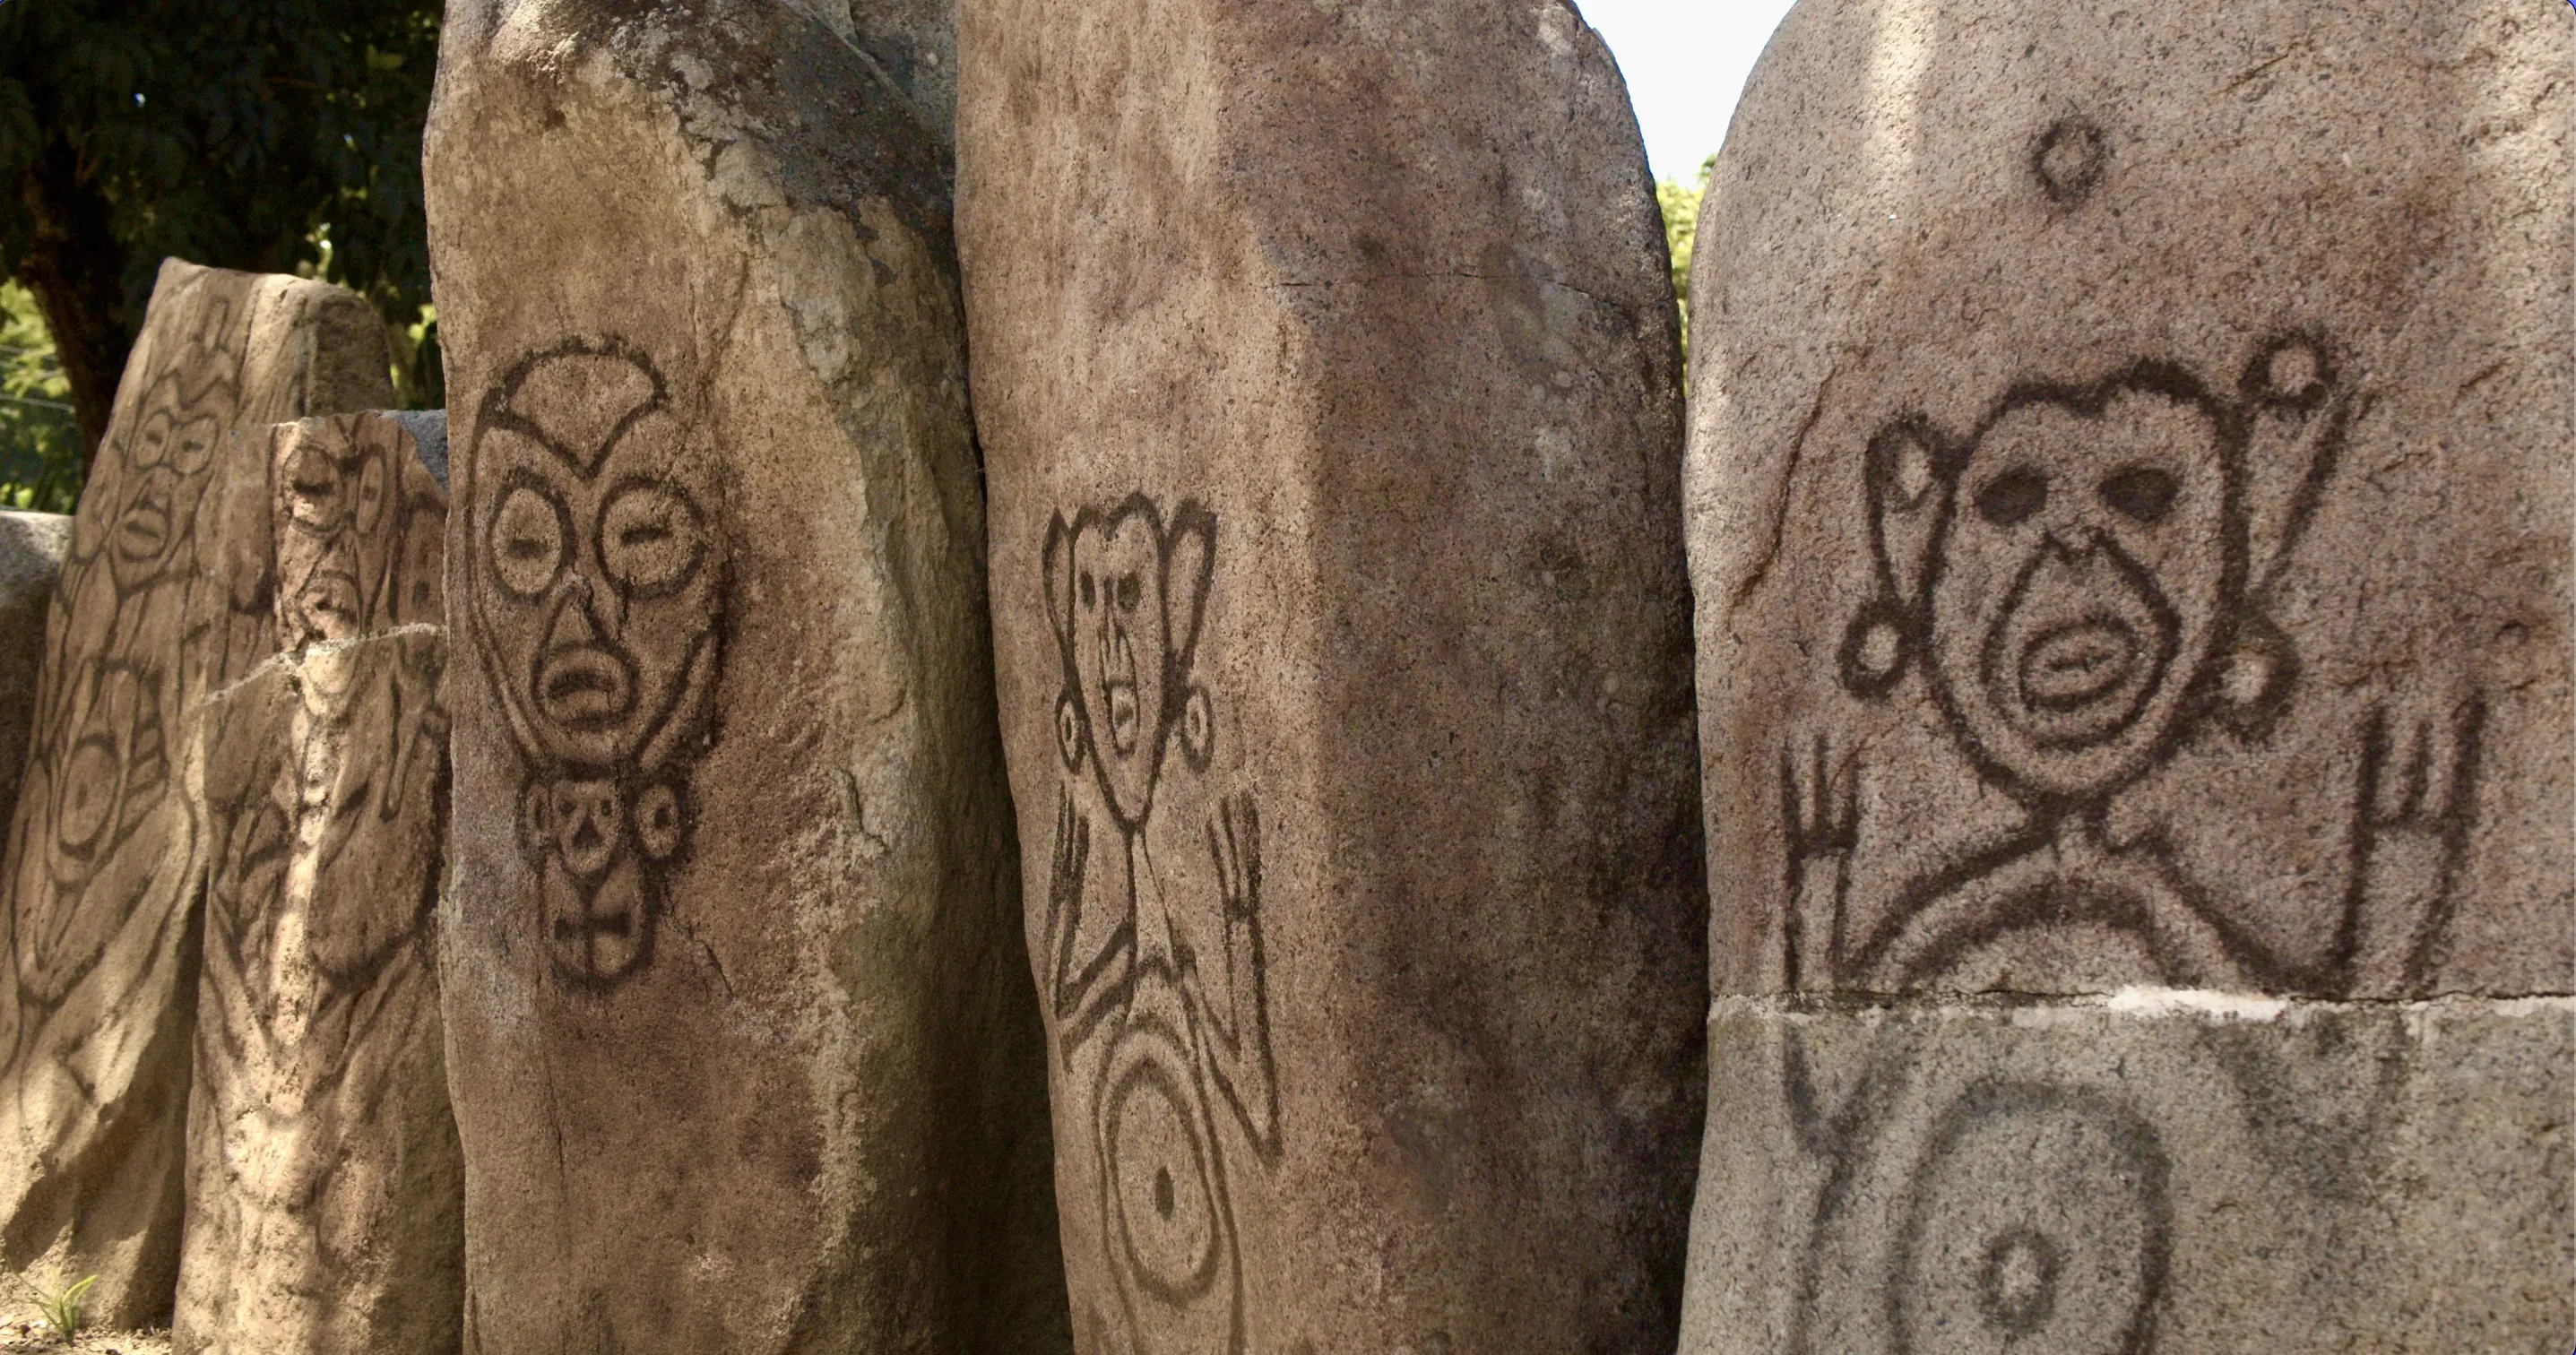 Portraits of the cemis on thick stone slabs